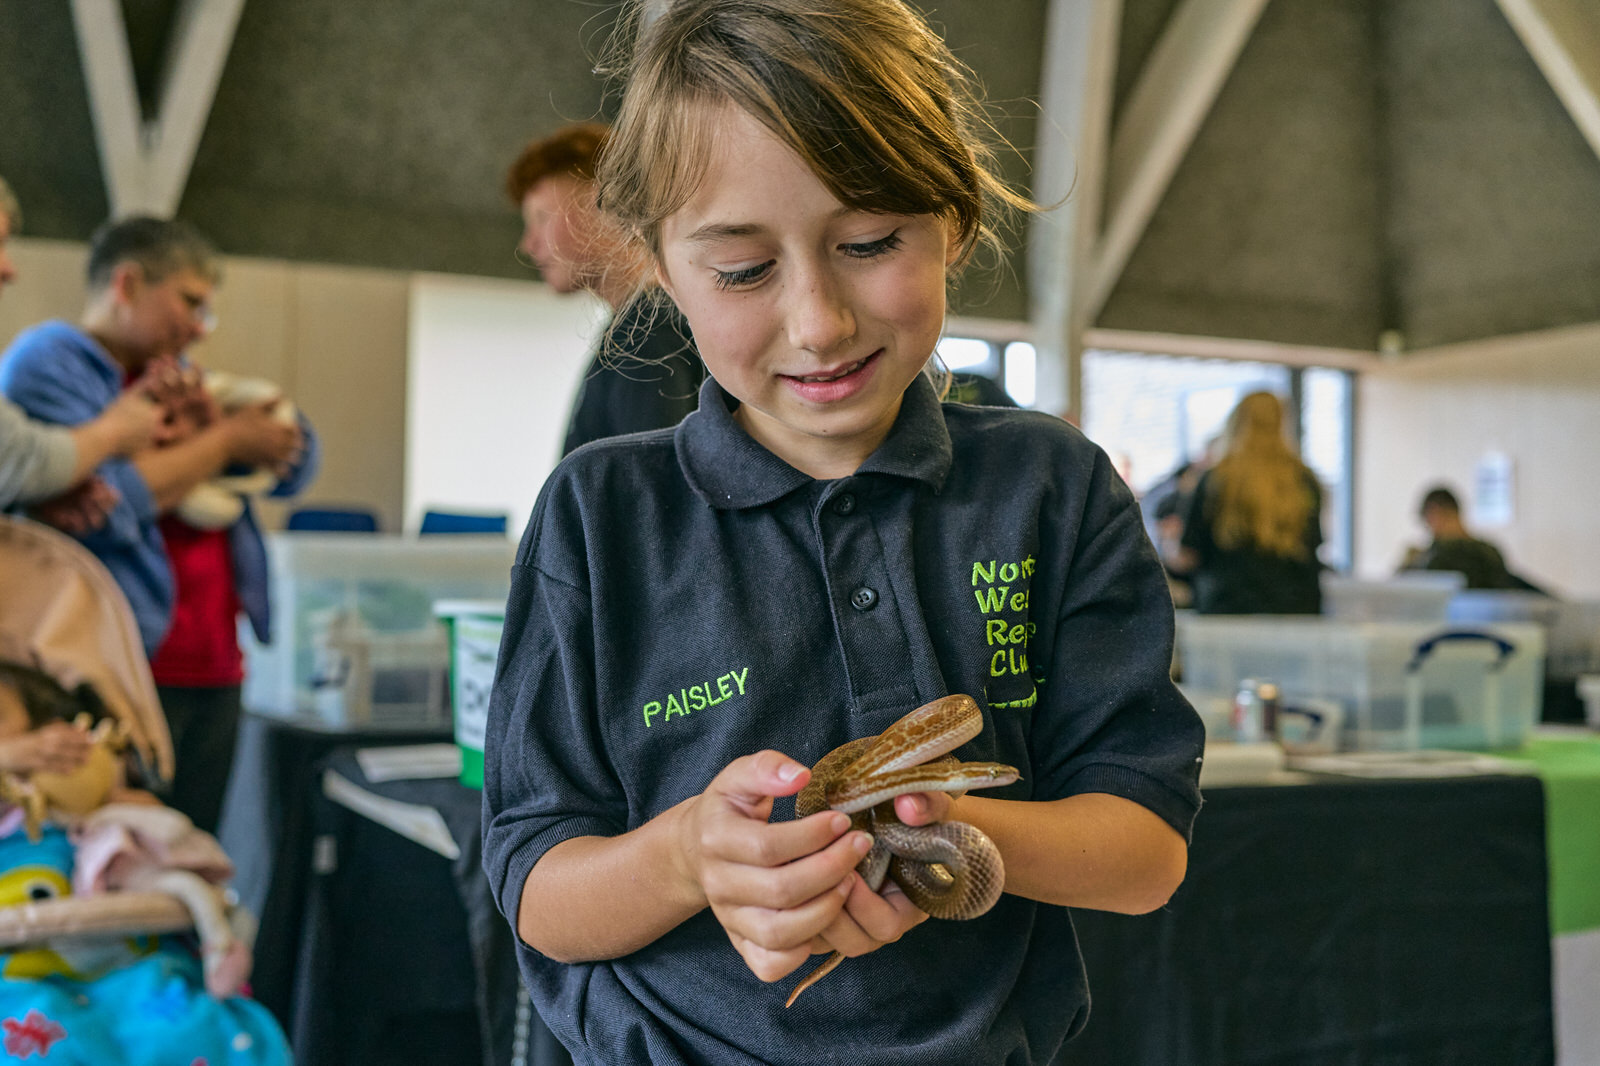 A girl excitedly holds an African House Snake at a reptile club